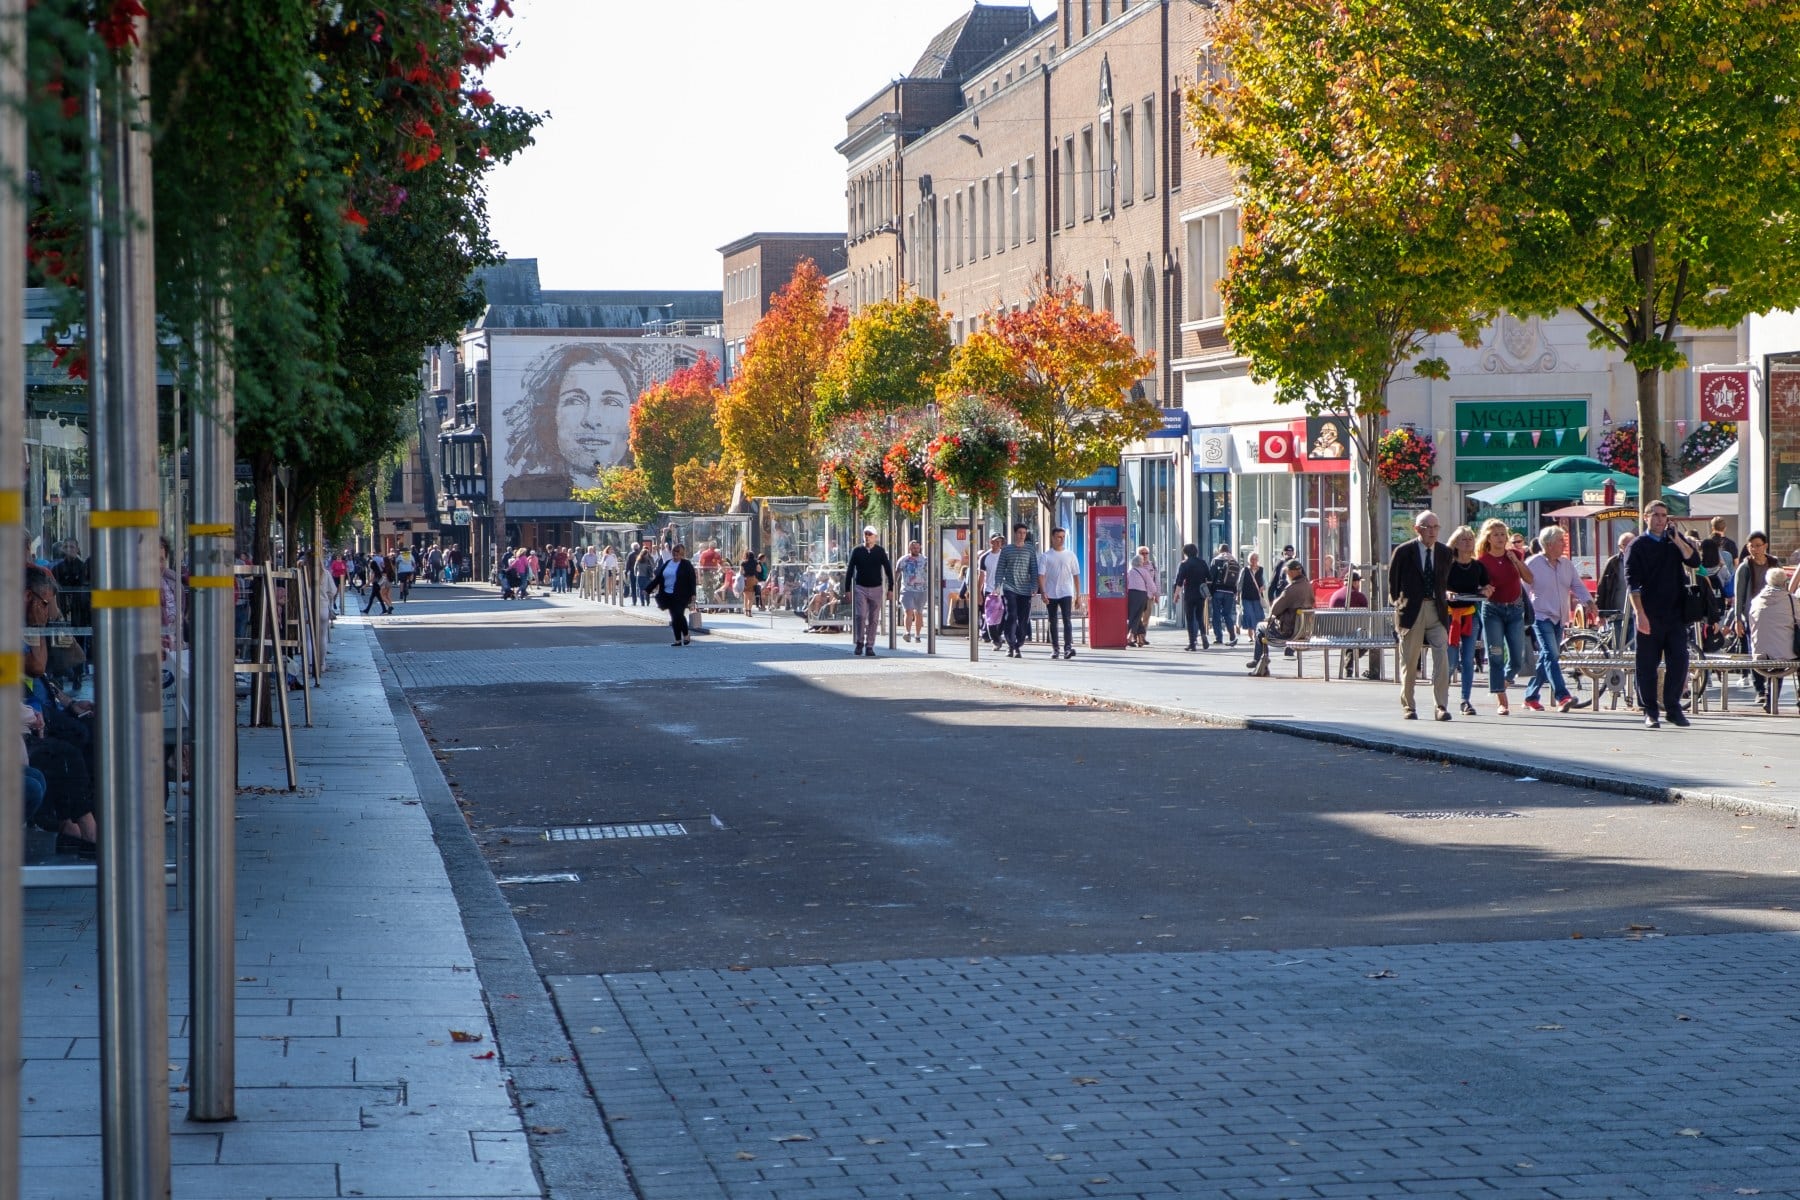 Exeter high street in the Autumn time